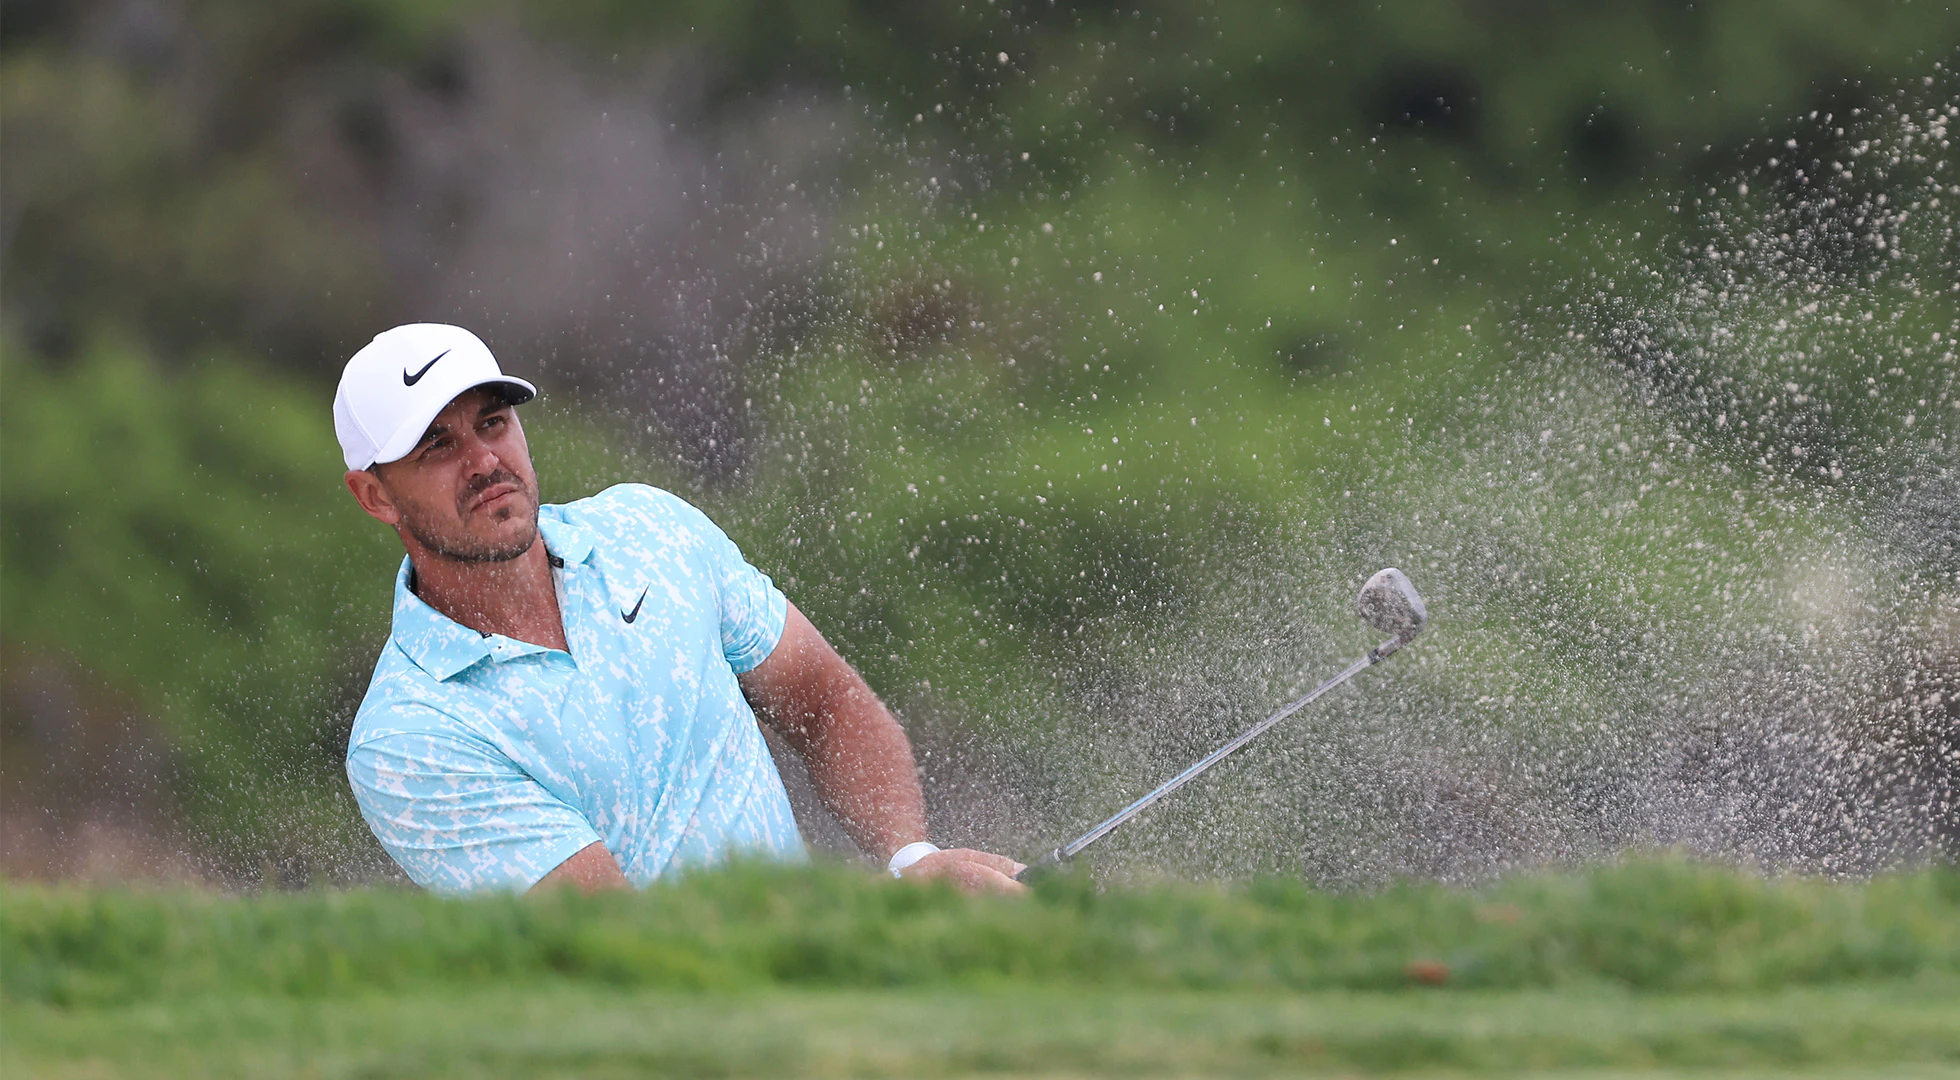 Brooks Koepka ‘not very pleased’ with U.S. Open finish, but ‘guess it could be worse’